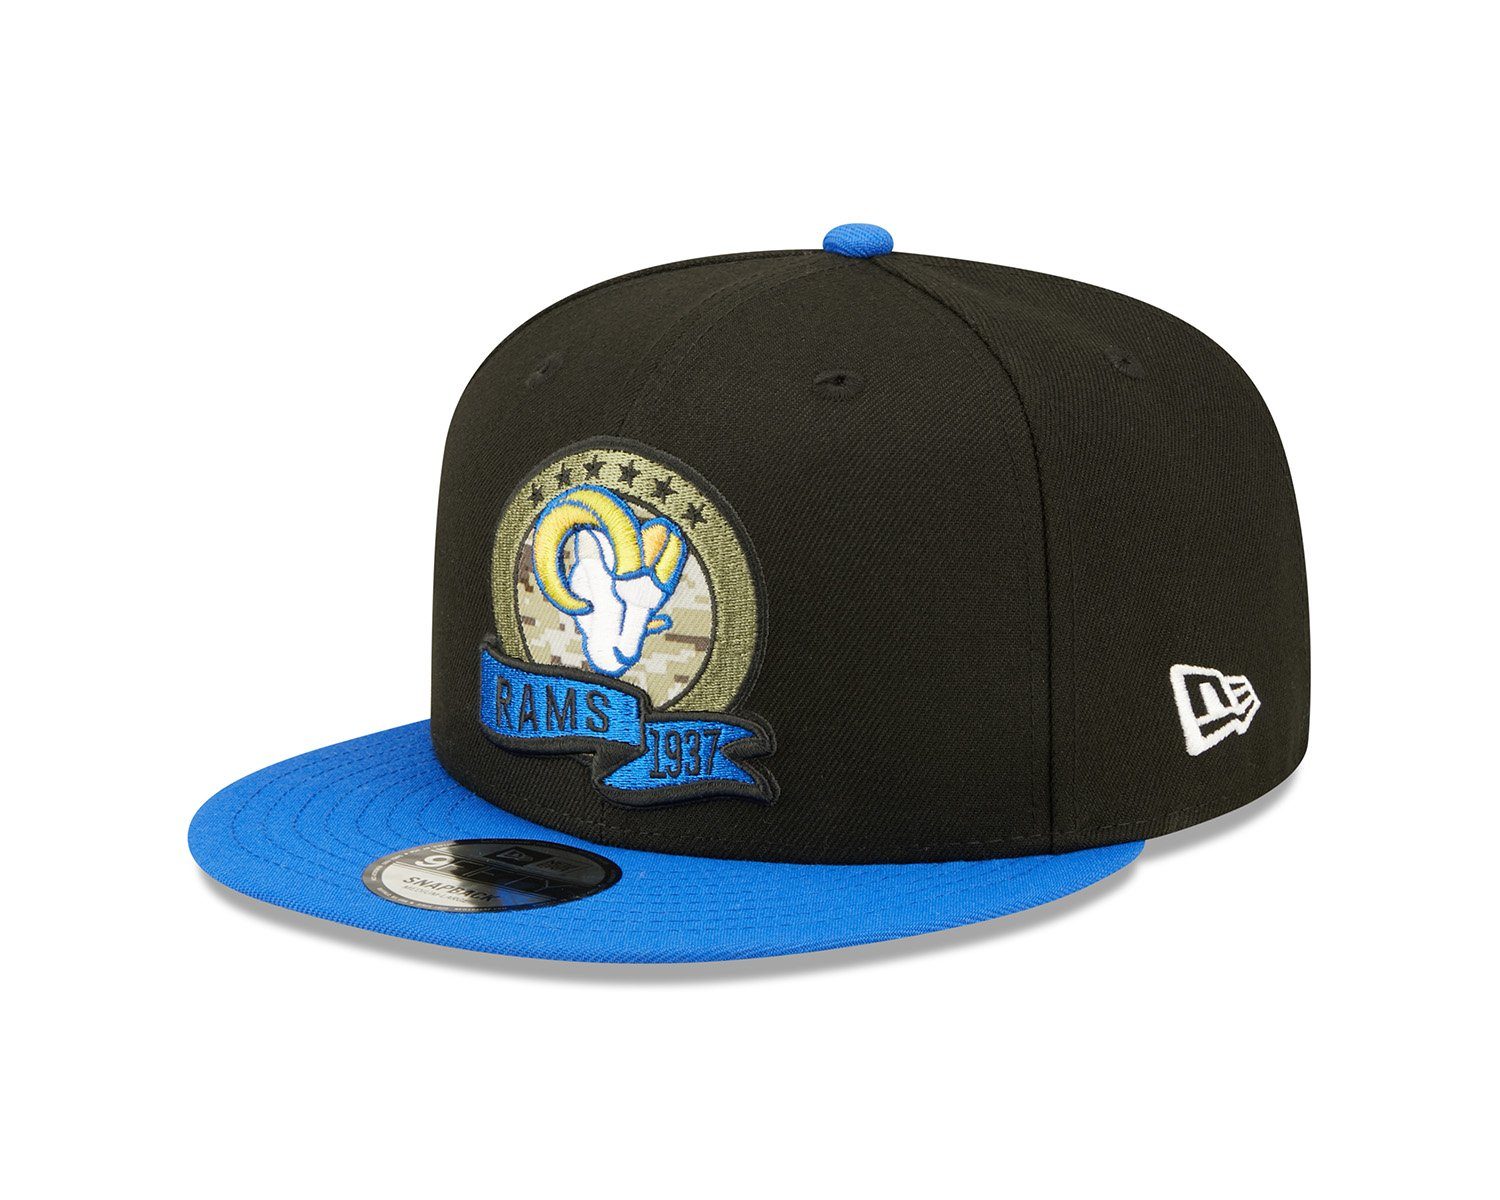 New Era Snapback Cap 9FIFTY NFL22 Salute To Service Los Angeles Rams